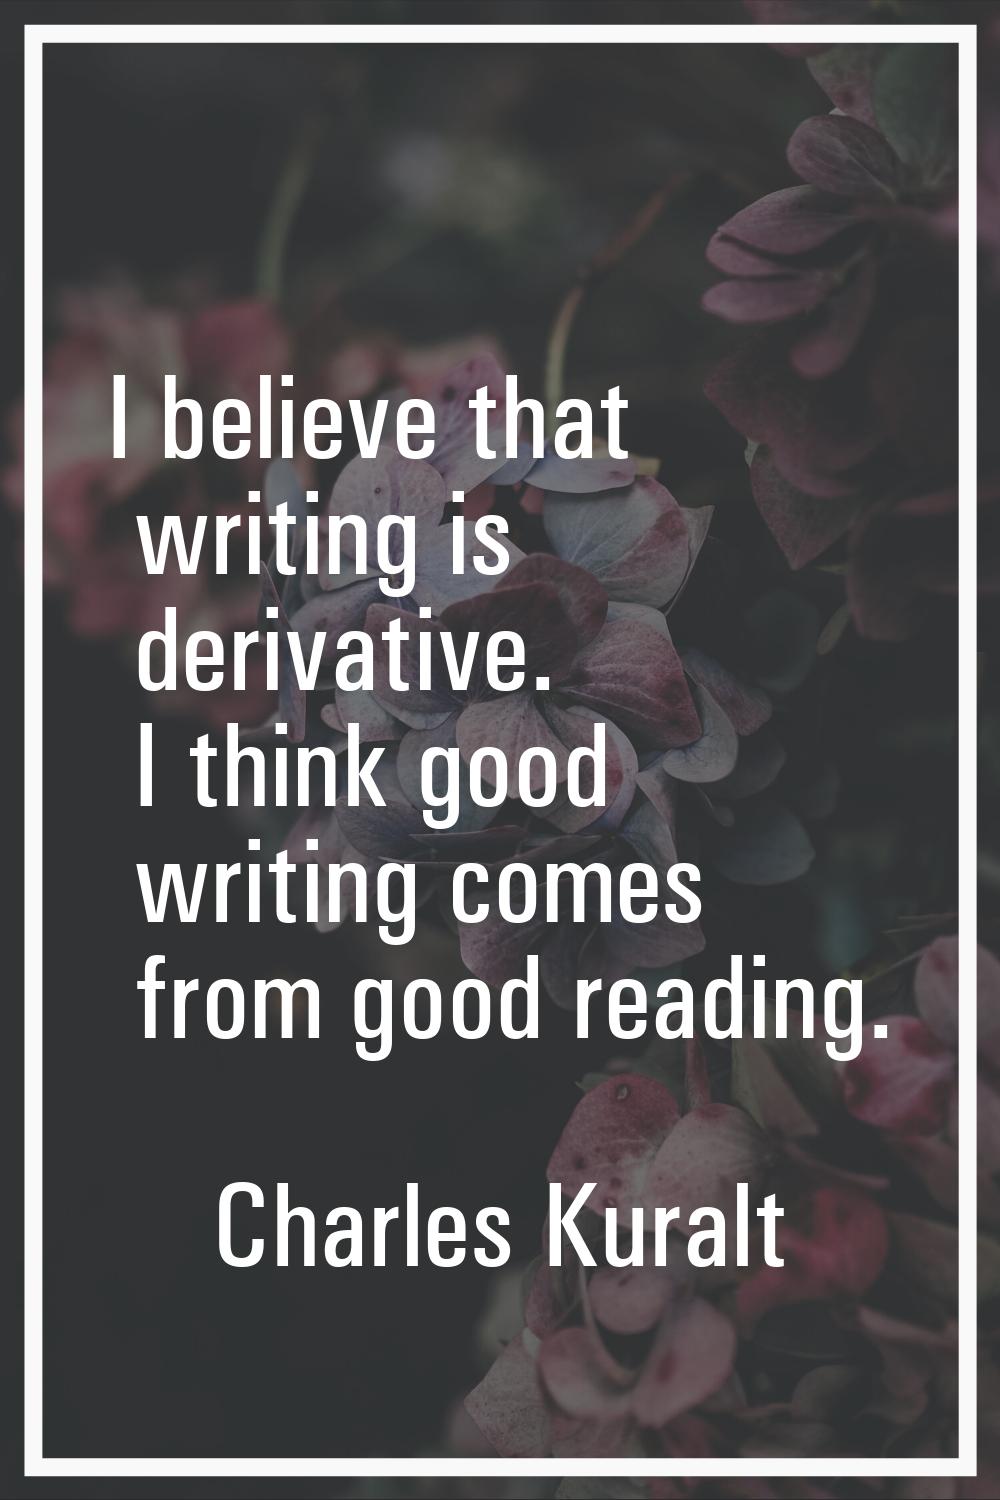 I believe that writing is derivative. I think good writing comes from good reading.